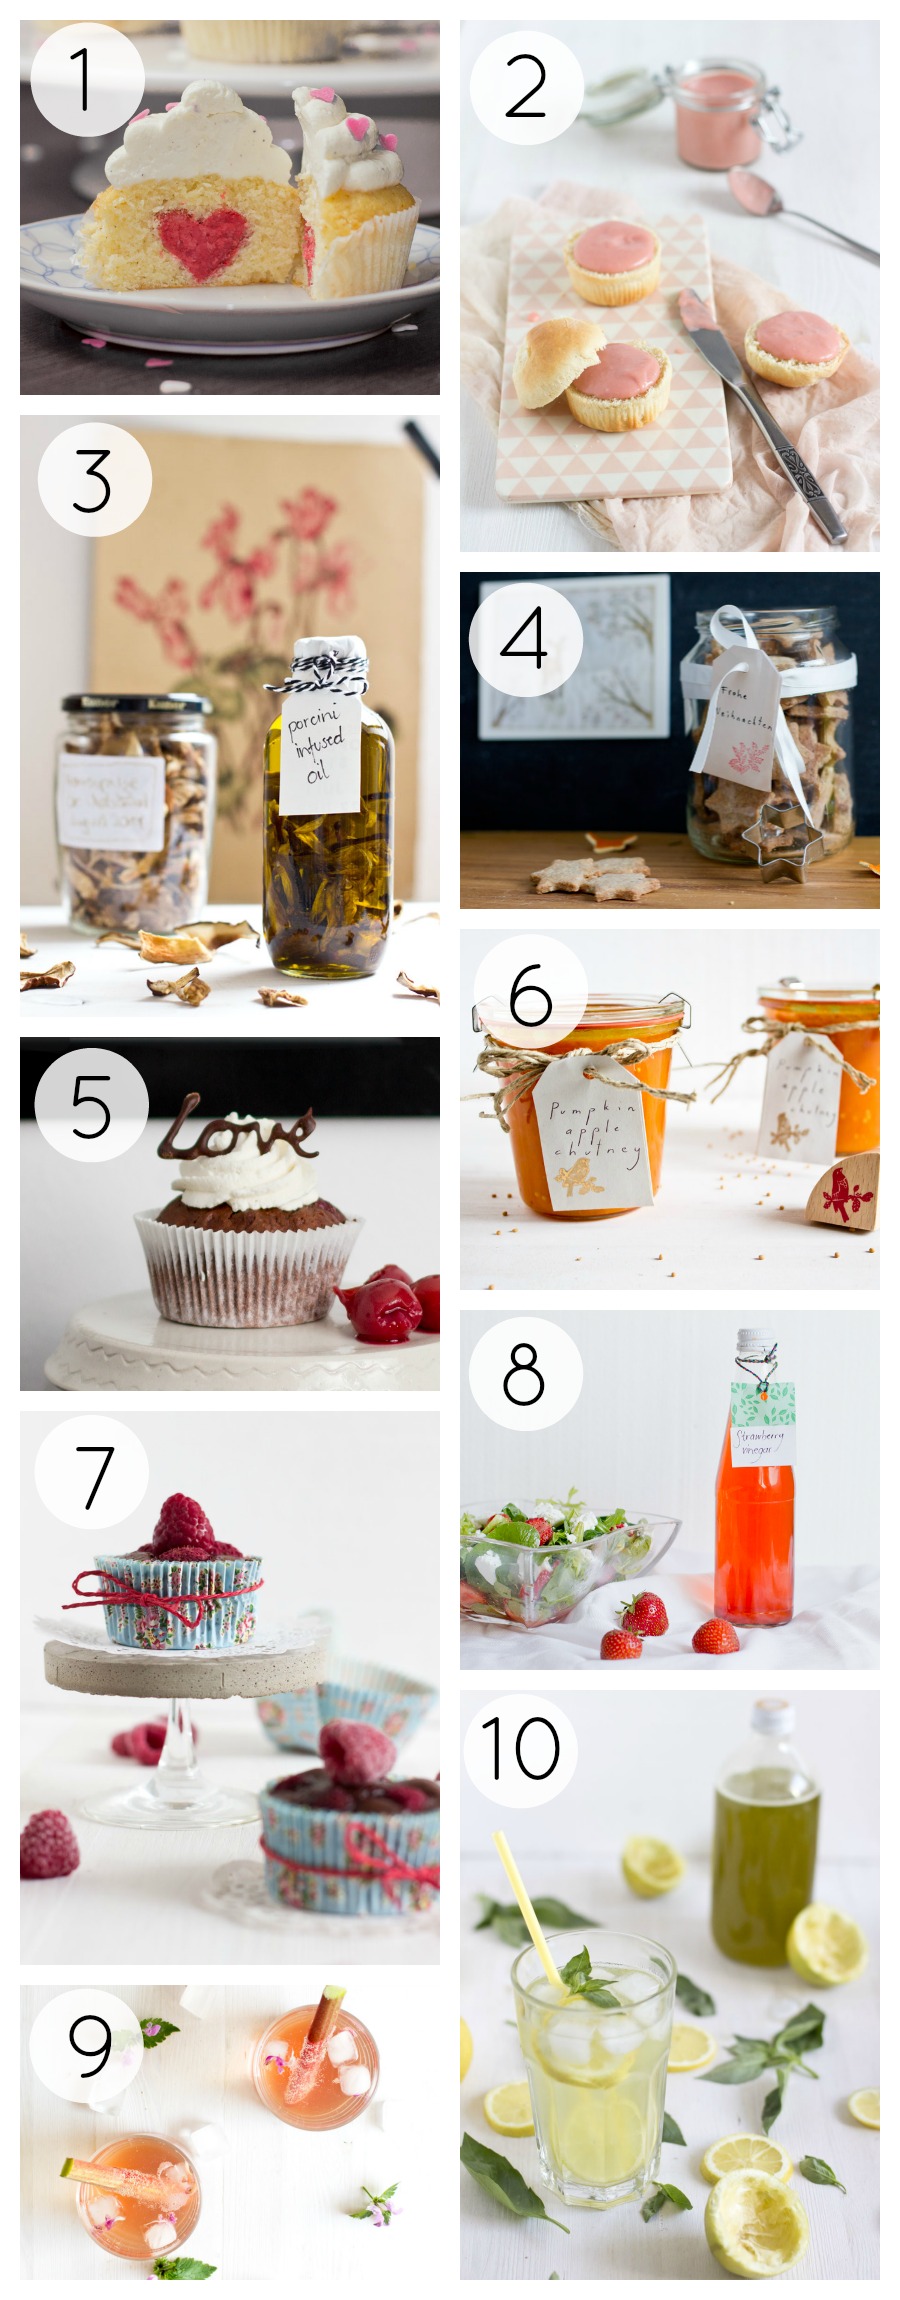 Top 10 of 2015: Food posts | LOOK WHAT I MADE ...